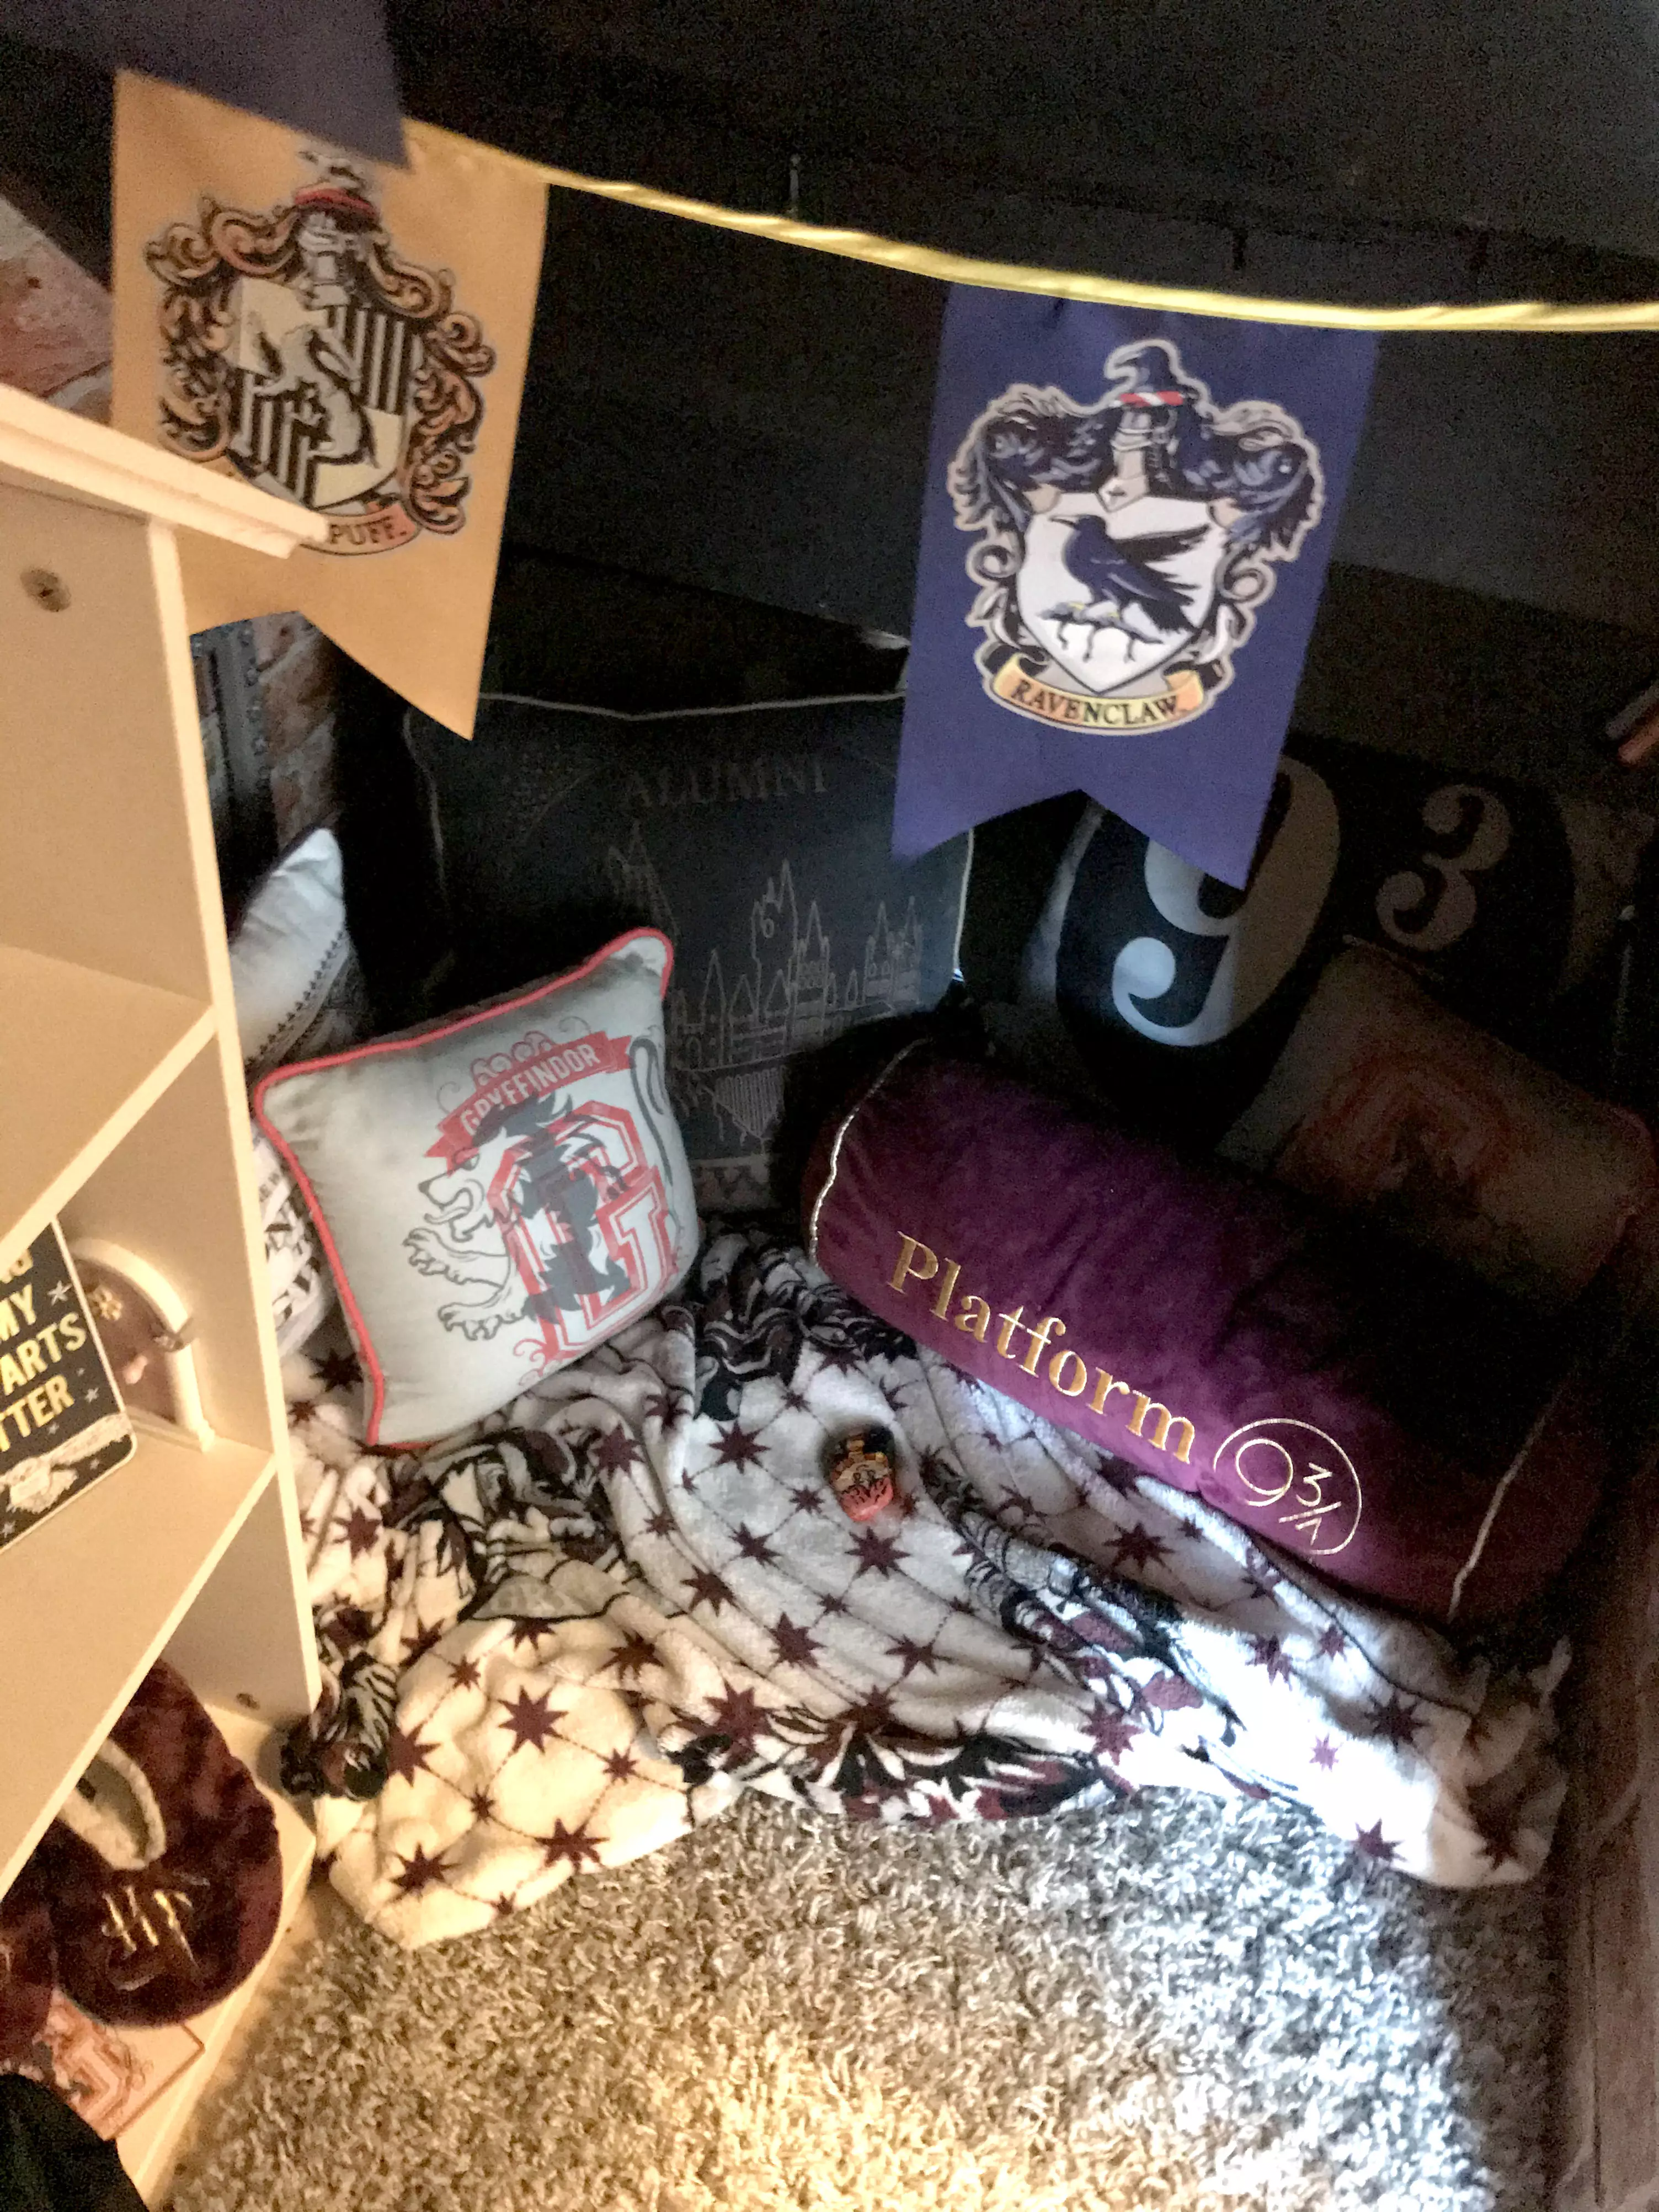 Poppy now has her own HP-inspired retreat (